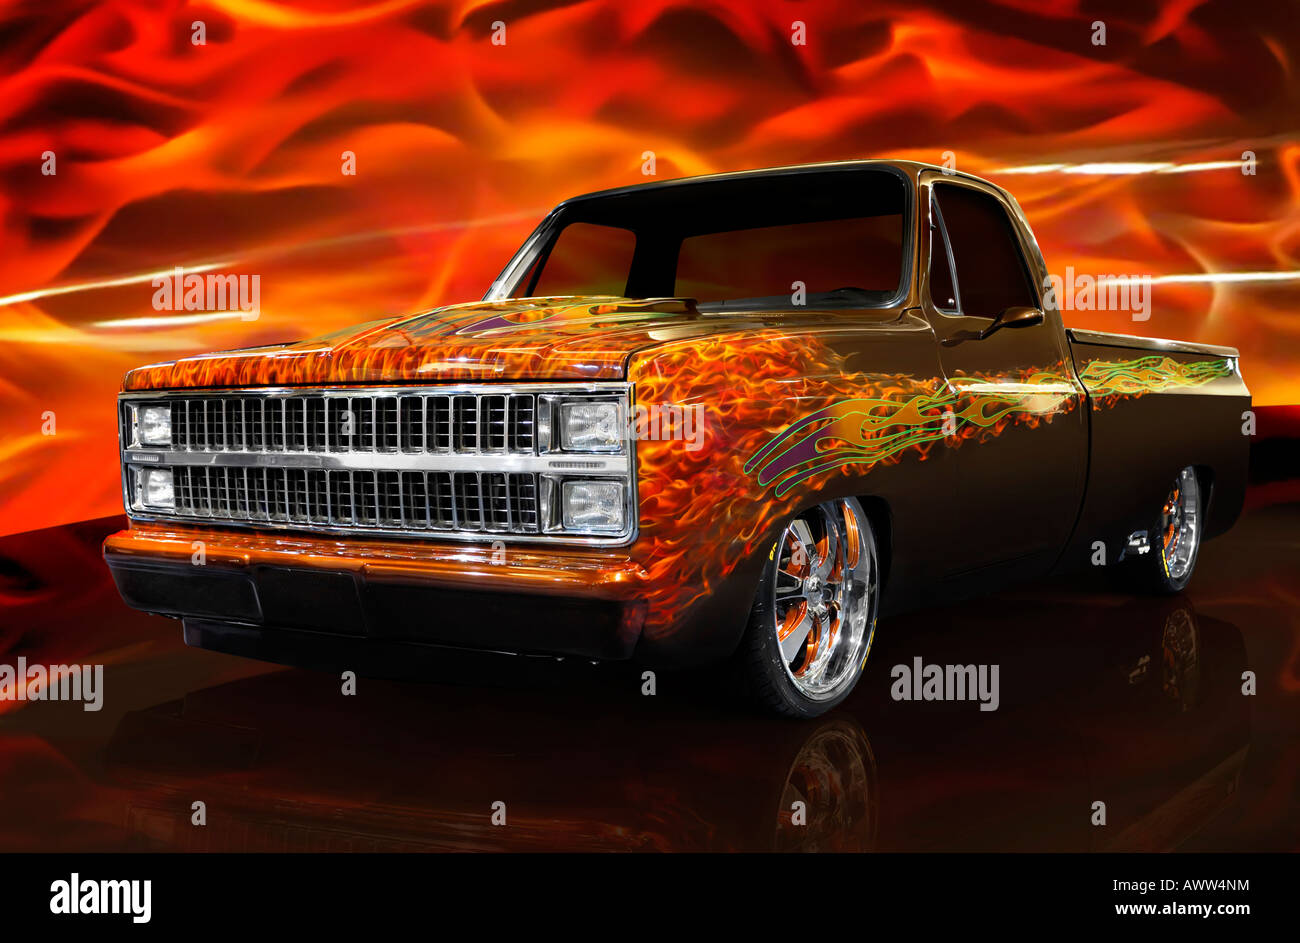 License and prints at MaximImages.com - Hot Rod Chevrolet Scotsdale 1978 retro pickup truck Stock Photo